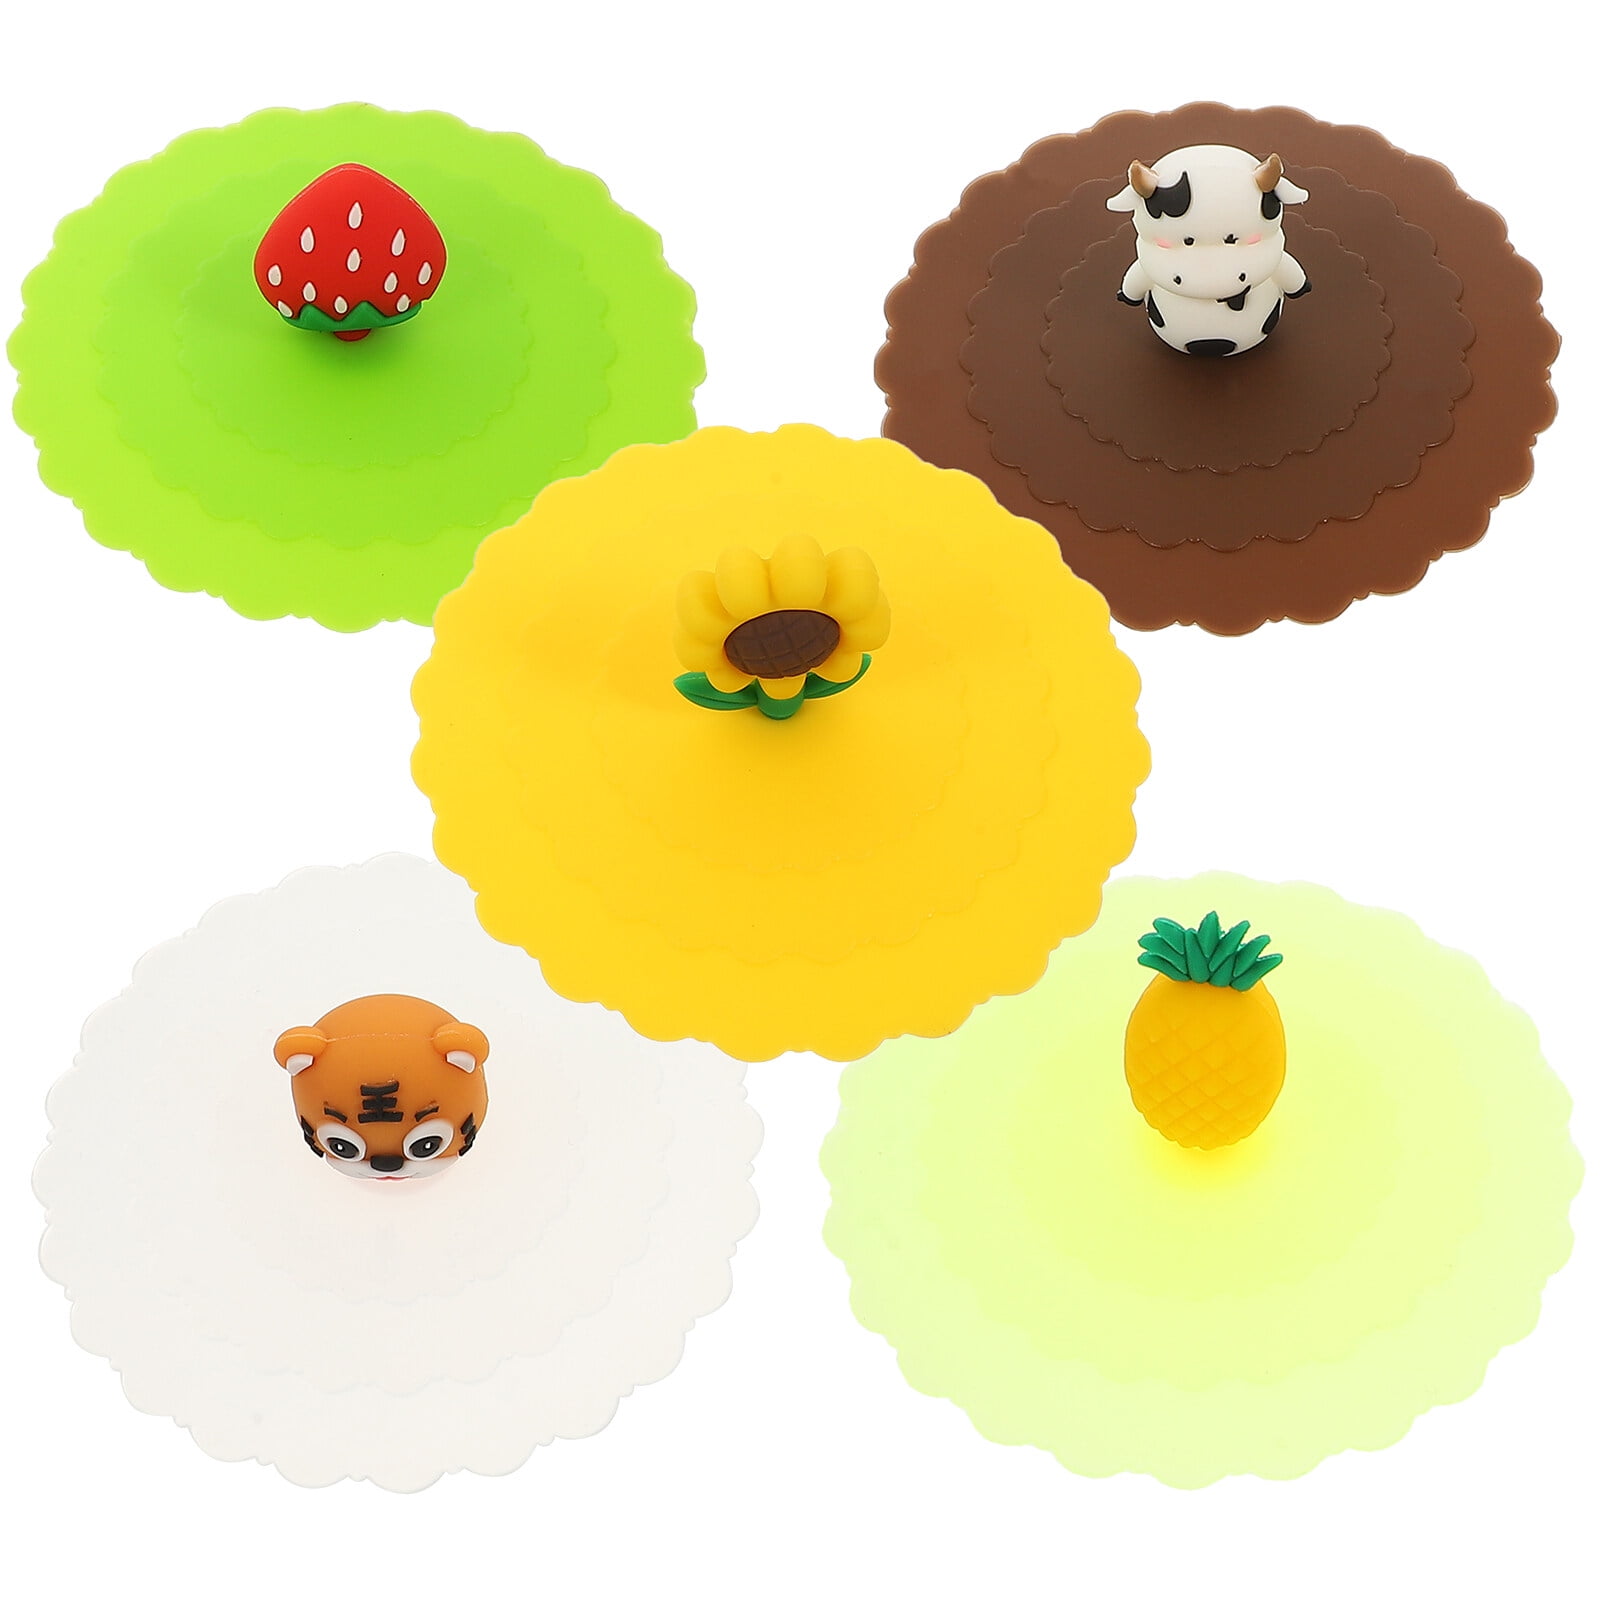 Keweilian Silicone Cup Covers (Set of 4) ， Multicolored Silicone